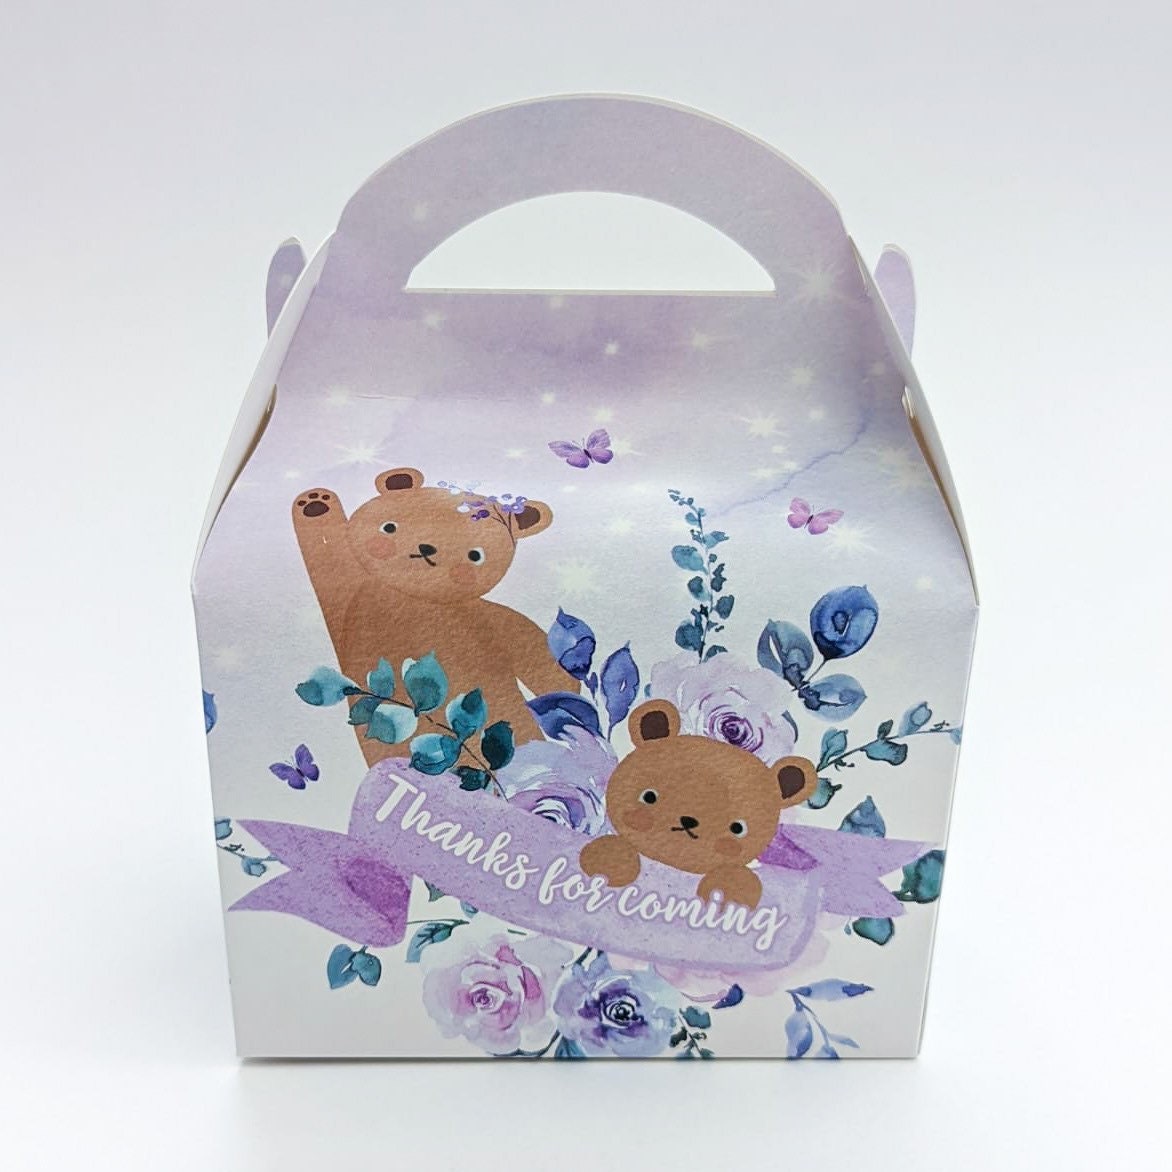 Watercolour Floral Purple Teddy Bears and Balloons Personalised Children’s Party Box Gift Bag Favour